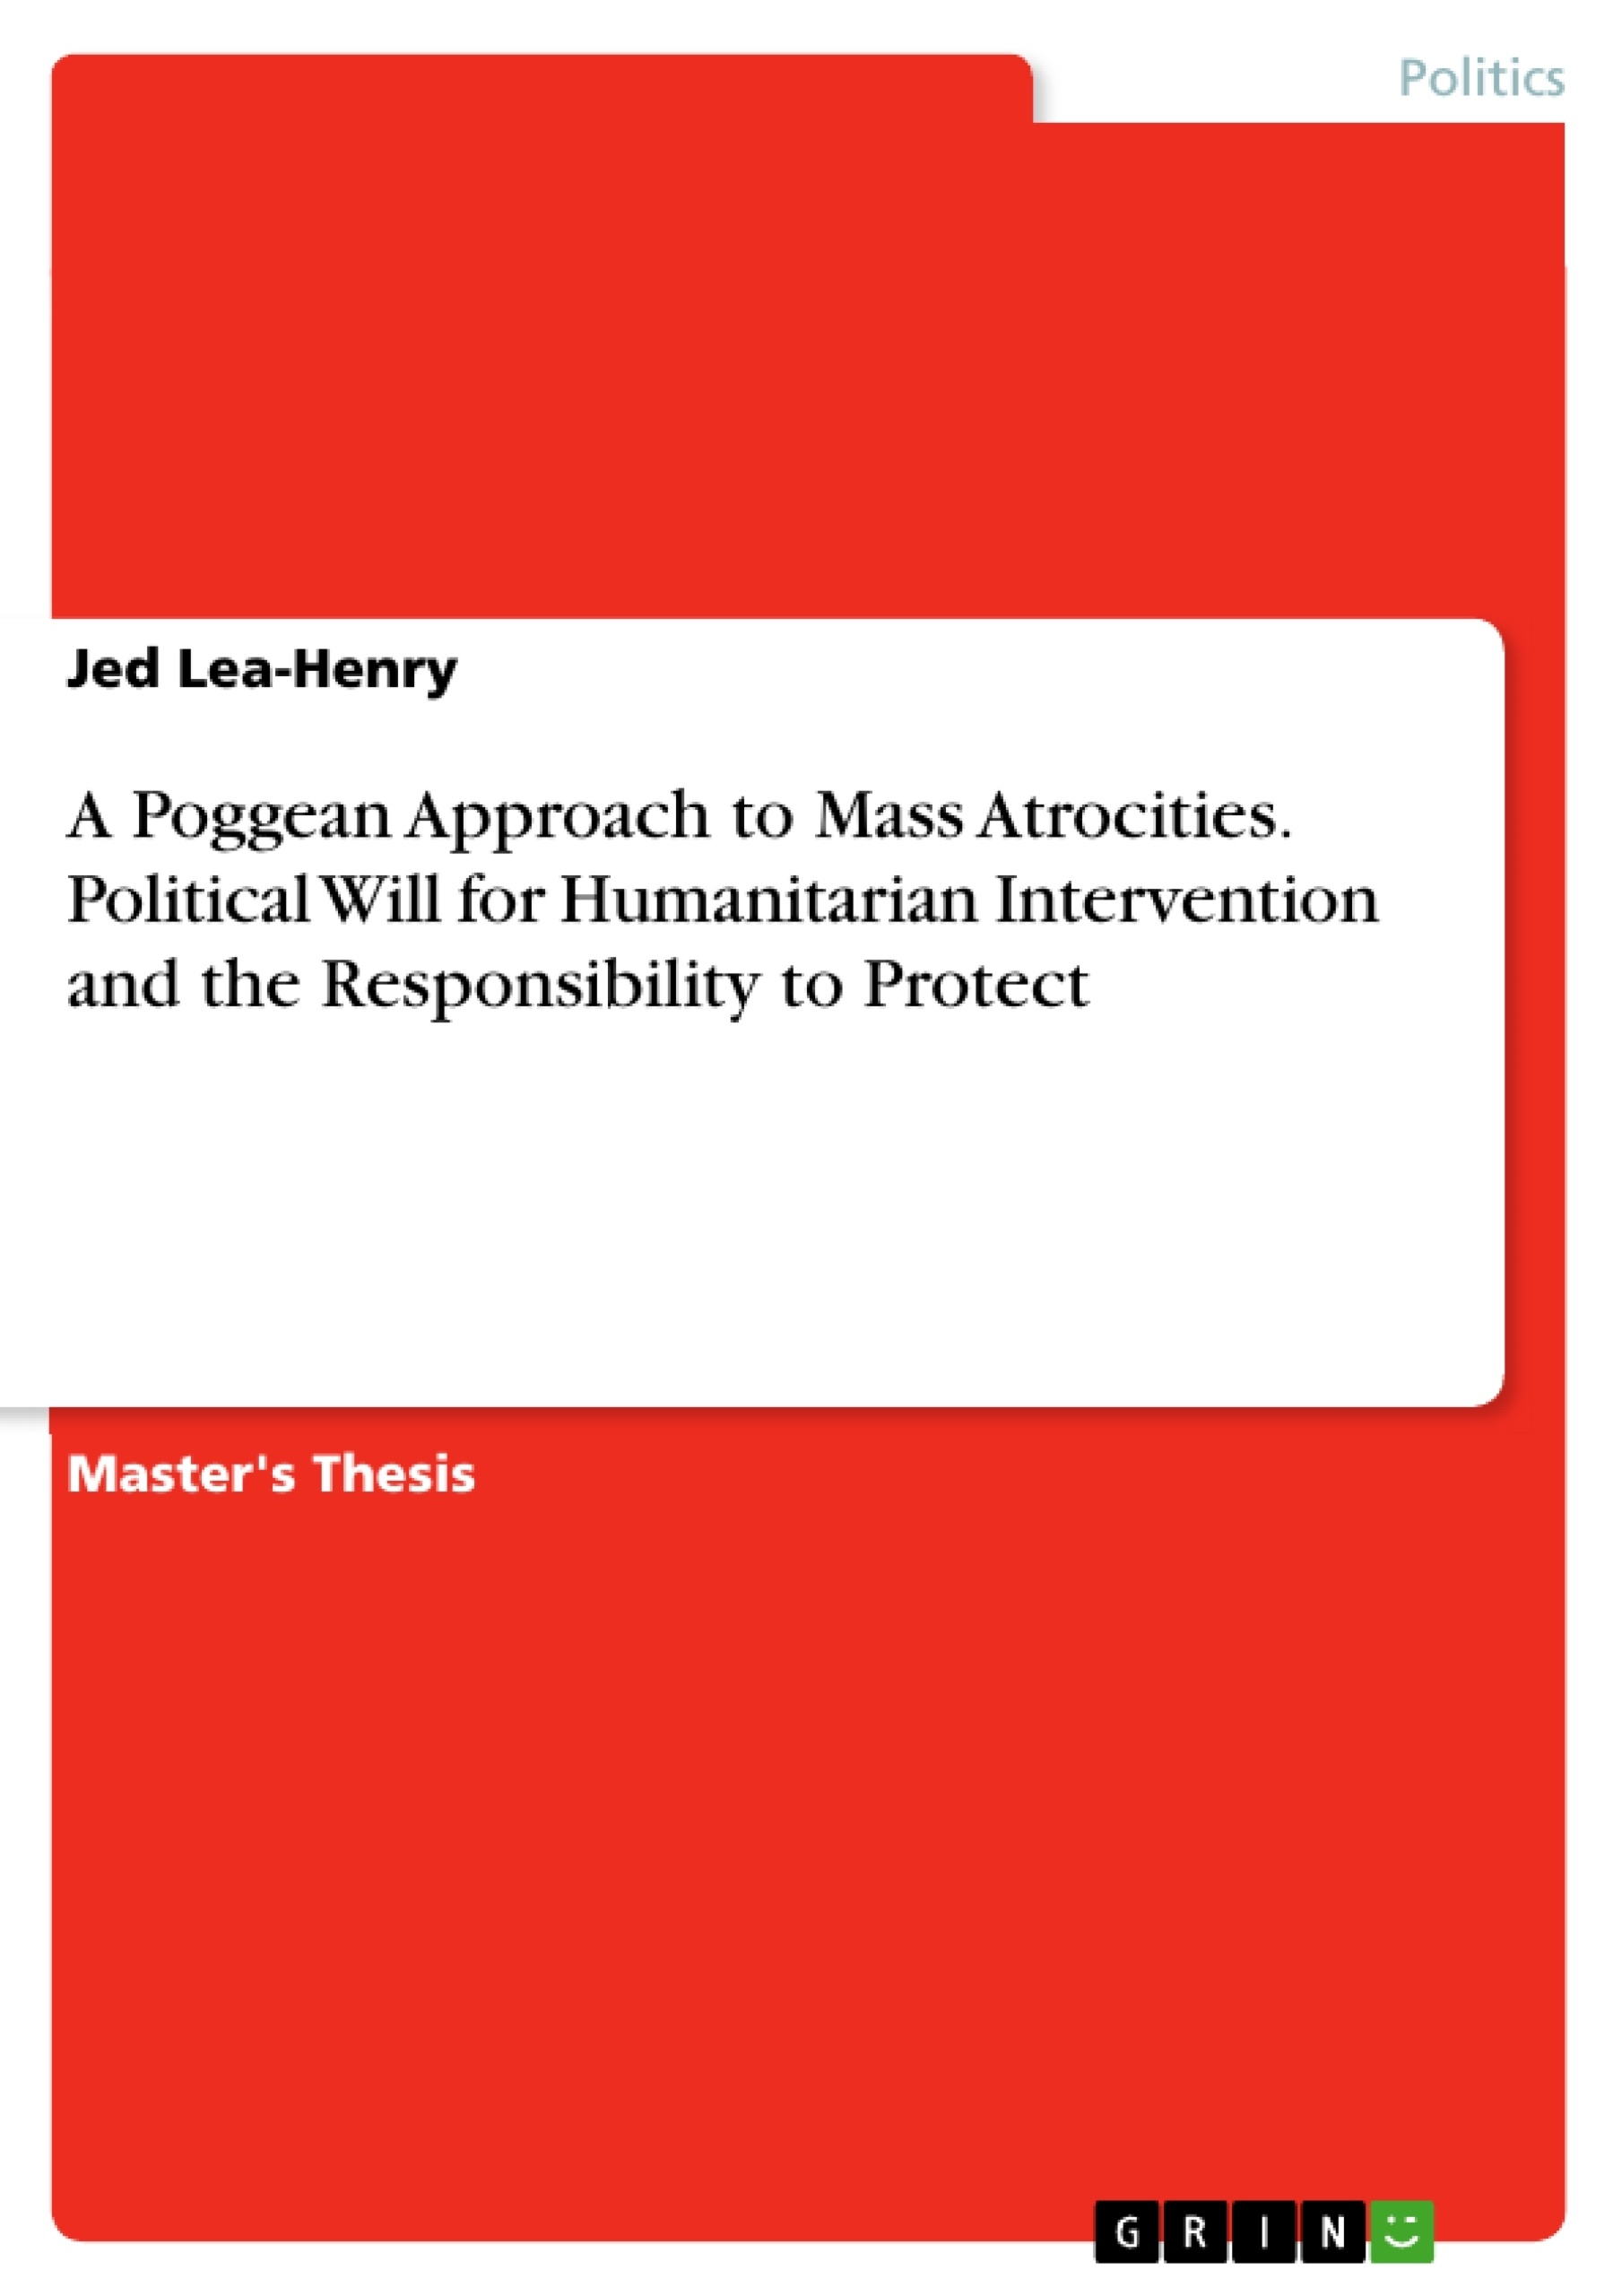 Title: A Poggean Approach to Mass Atrocities. Political Will for Humanitarian Intervention and the Responsibility to Protect